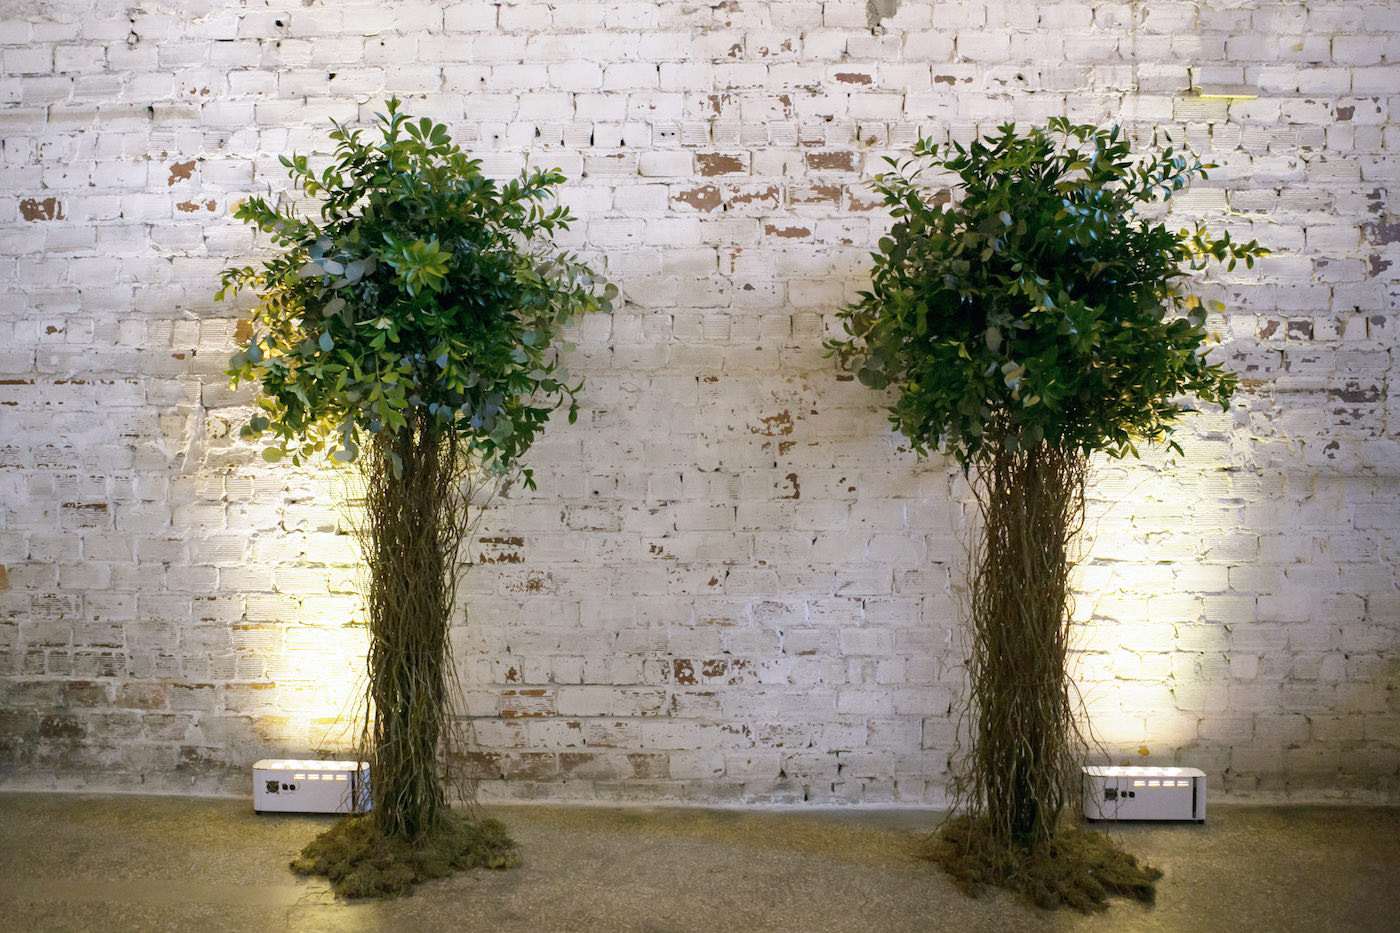 Wes Anderson Wedding Ceremony Decor, Curly Willow Trees Against White Brick Wall and Uplighting | Wedding Photographer Carrie Wildes Photography | Tampa Bay Wedding Florist Monarch Events and Design | Wedding Planner UNIQUE Weddings & Events | Wedding Venue Rialto Theatre